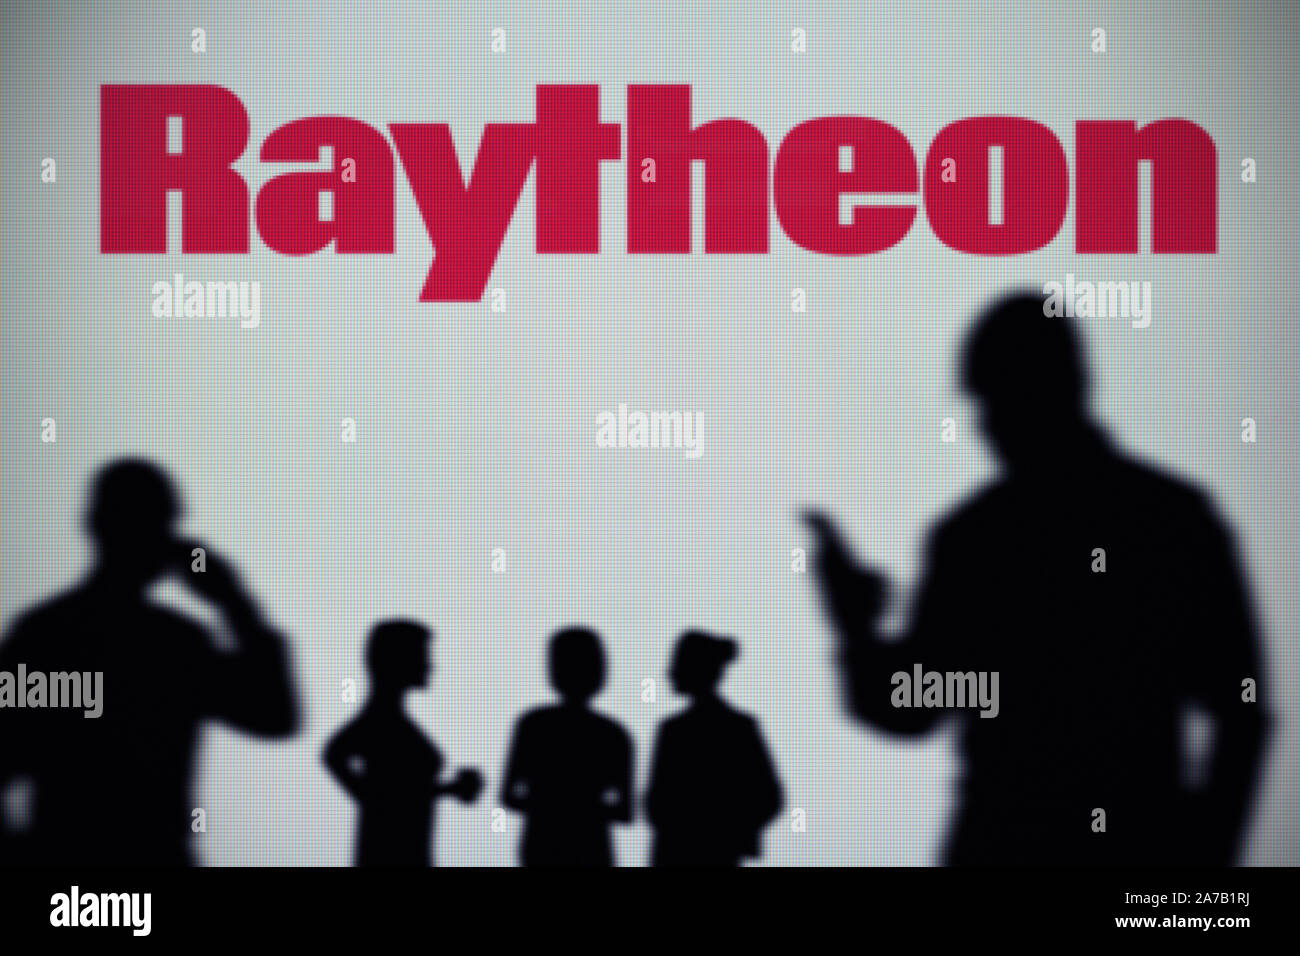 The Raytheon logo is seen on an LED screen in the background while a silhouetted person uses a smartphone (Editorial use only) Stock Photo